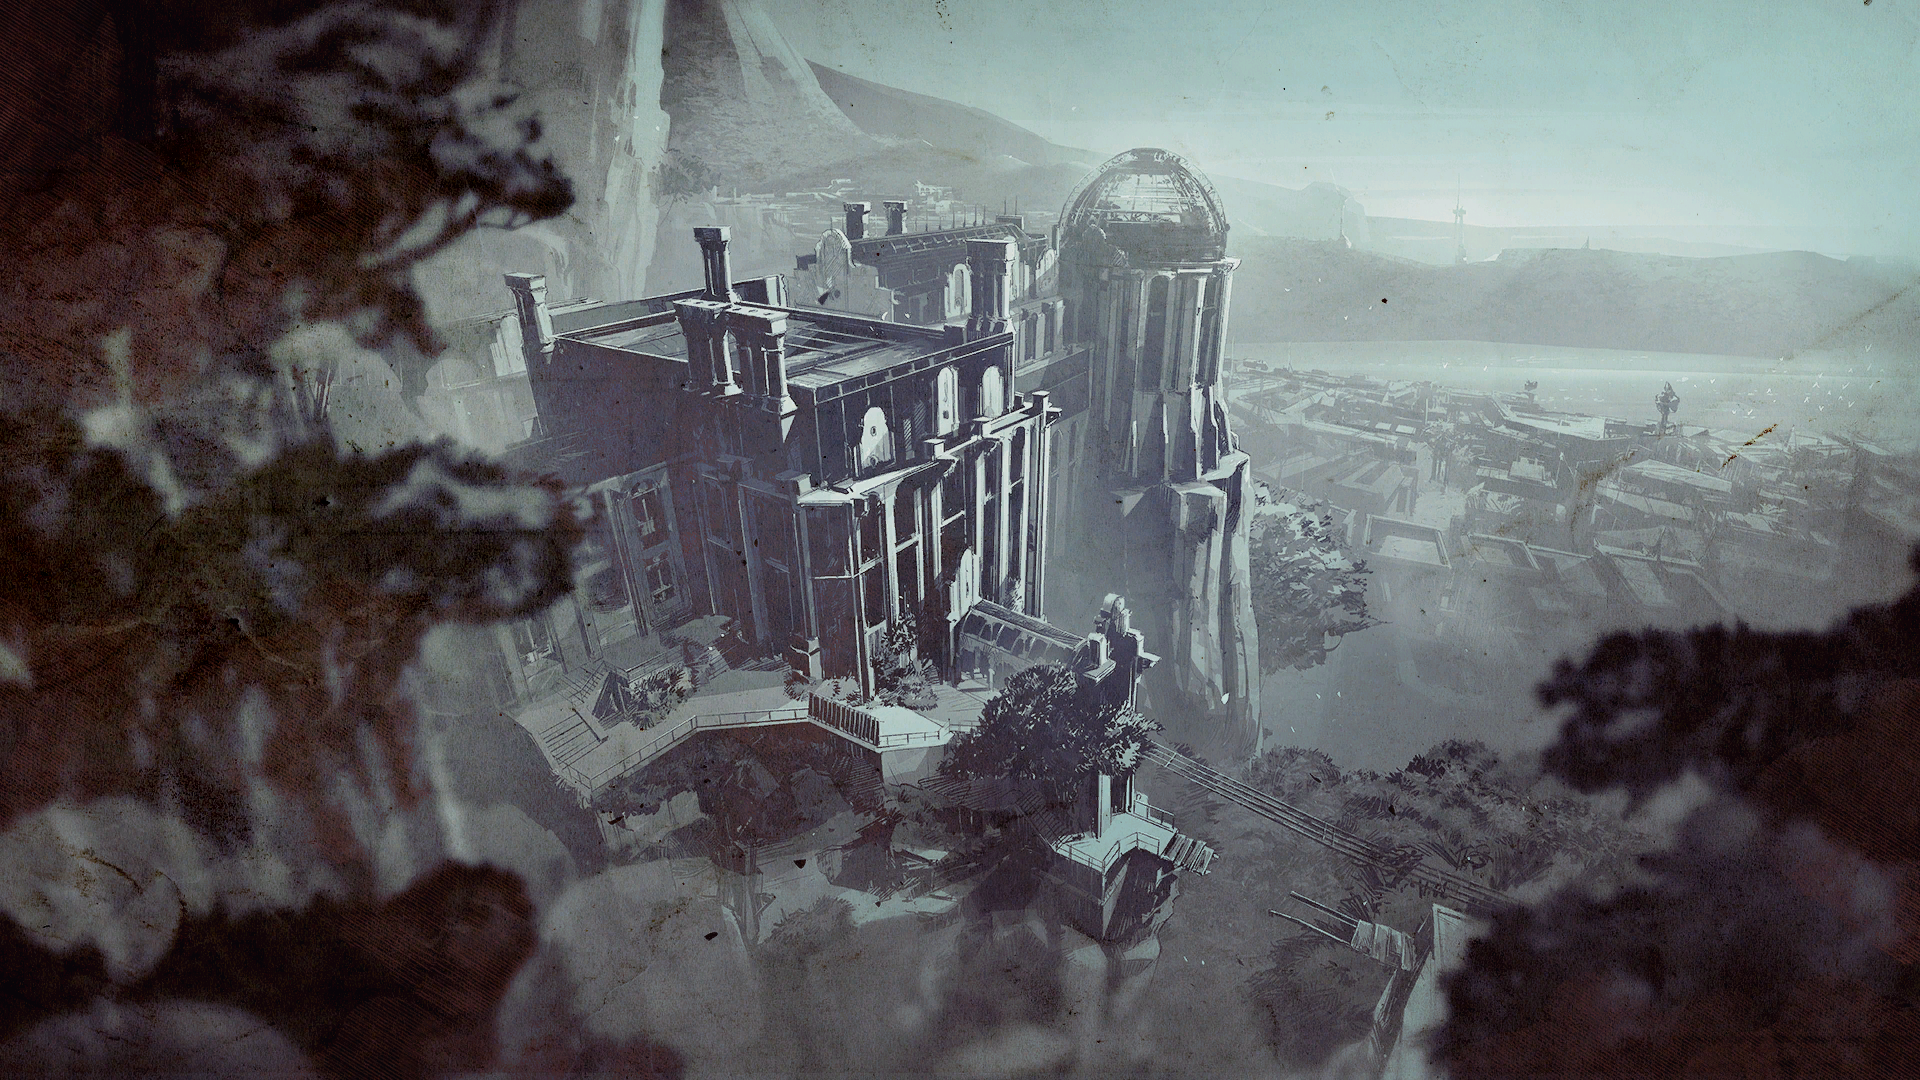 Hands-on with Dishonored 2, The Clockwork Mansion